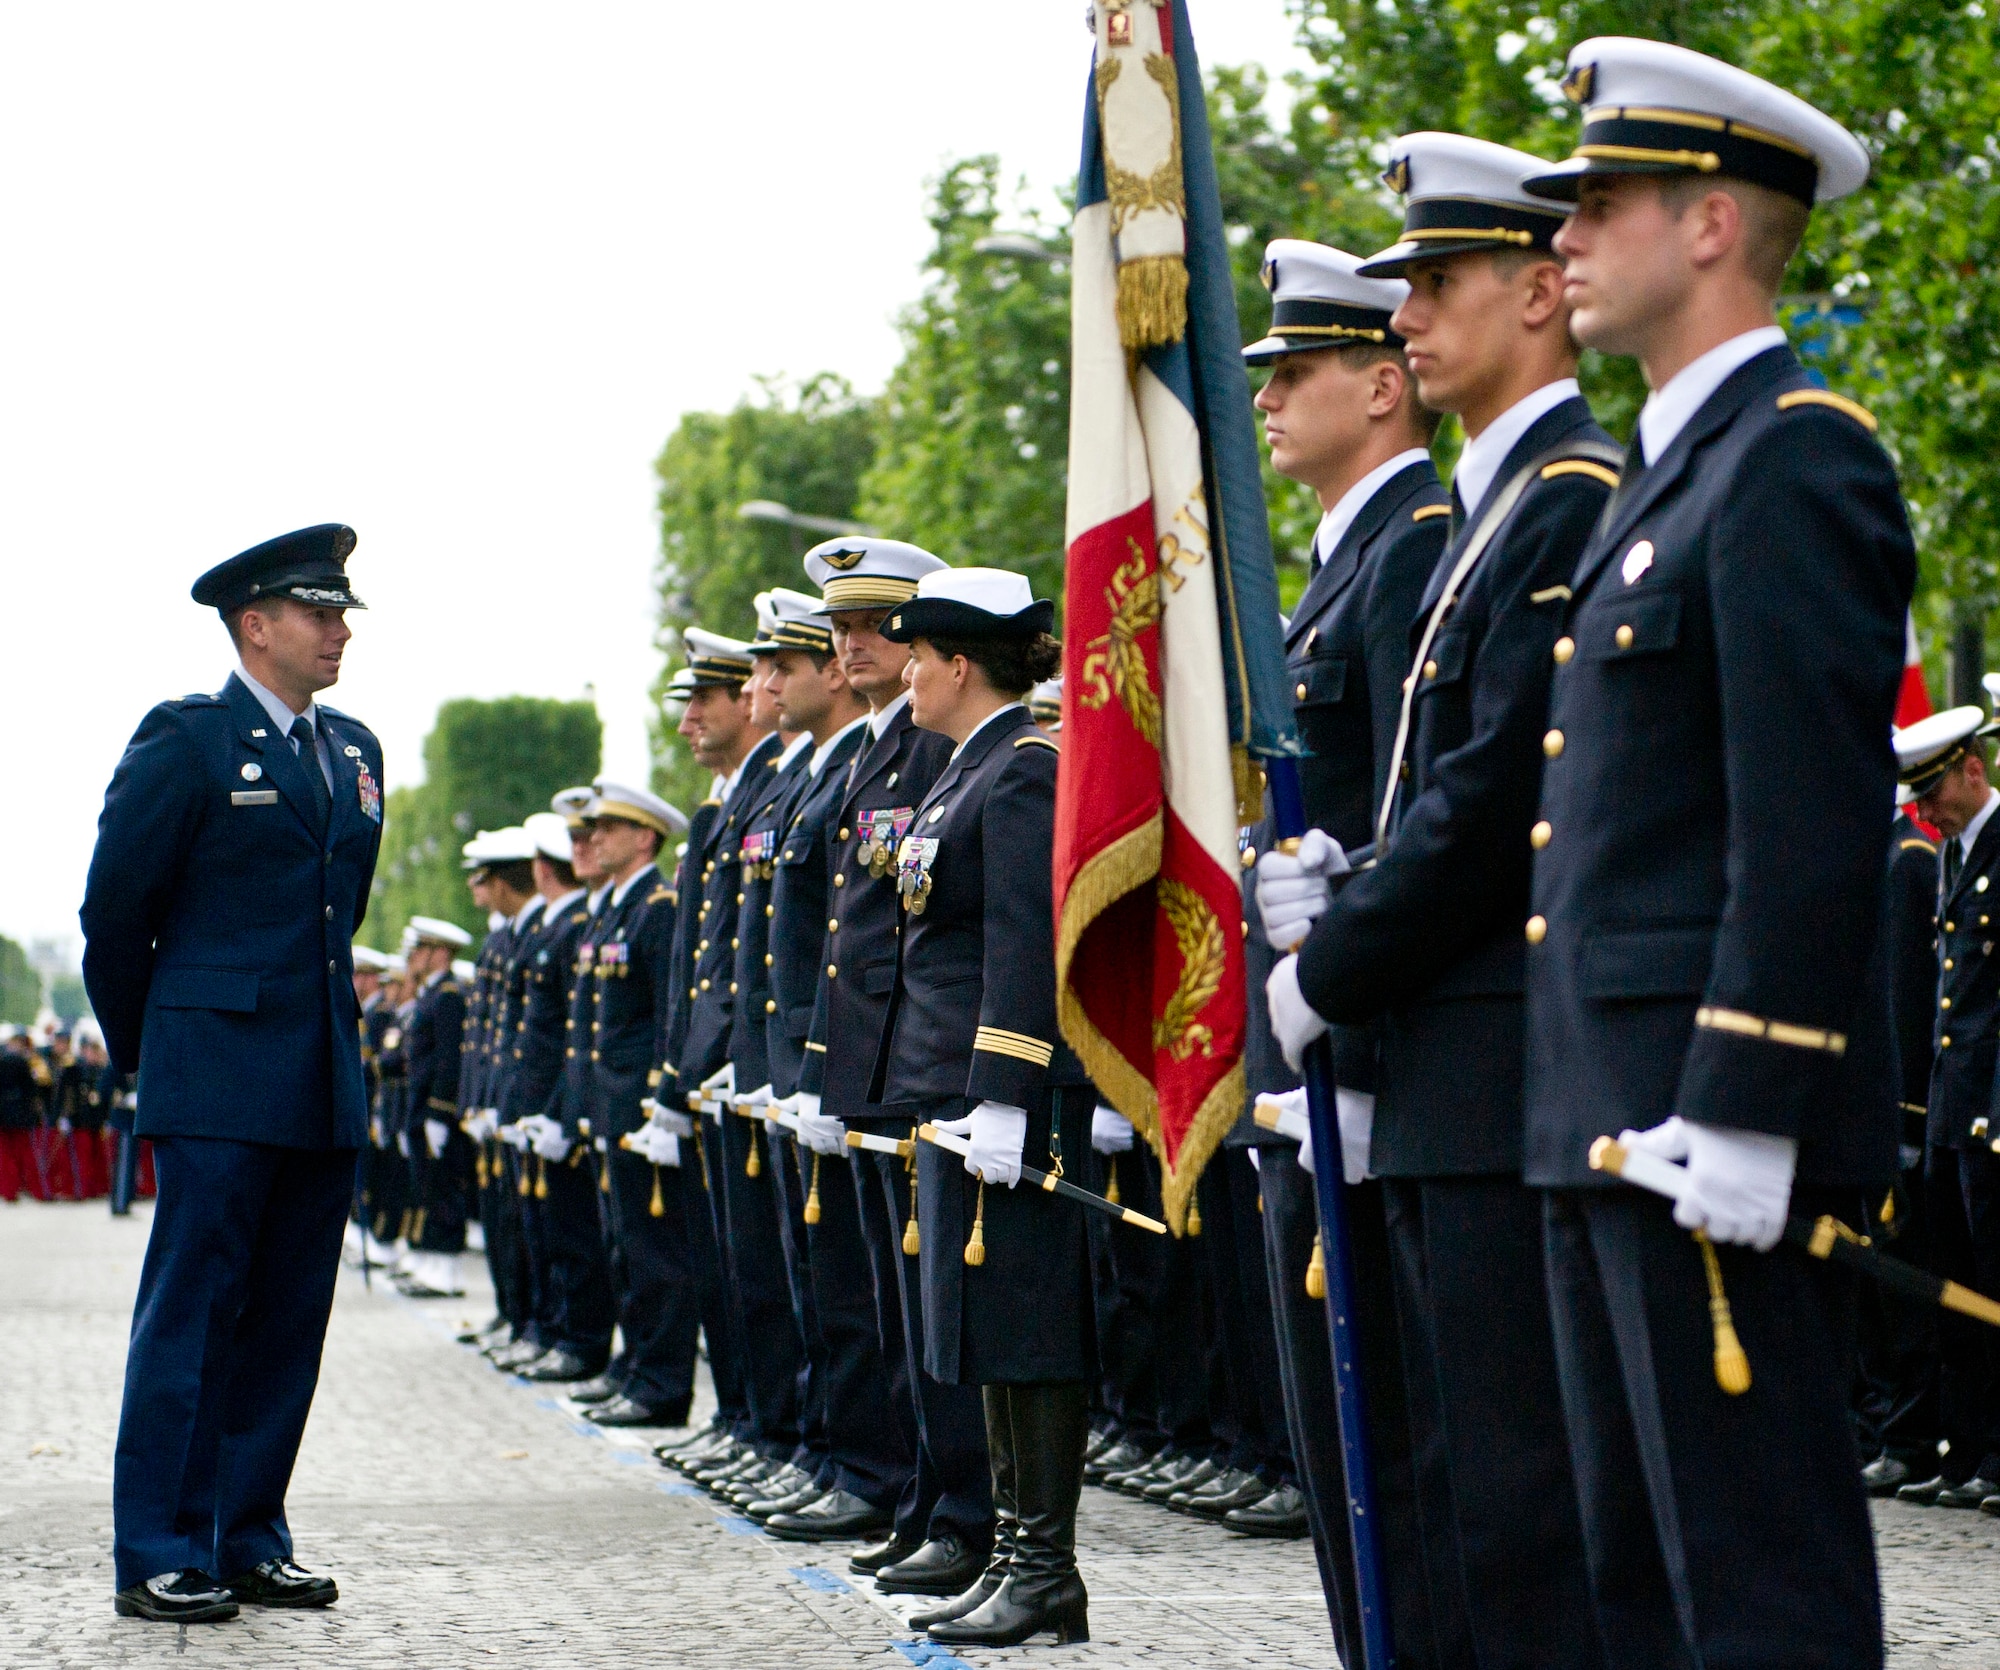 PARIS -- U.S. Air Force Maj. James Gingras, French Air Force Academy exchange officer, left, speaks with his cadets before marching in the 2012, 14th of July parade in Paris. The 14th of July, known in English by Bastille Day, is the French equivalent of the American 4th of July. It commemorates the attack on the Bastille on July 14, 1989, which preceded the French revolution. (U.S. Air Force photo/Staff Sgt. Benjamin Wilson)